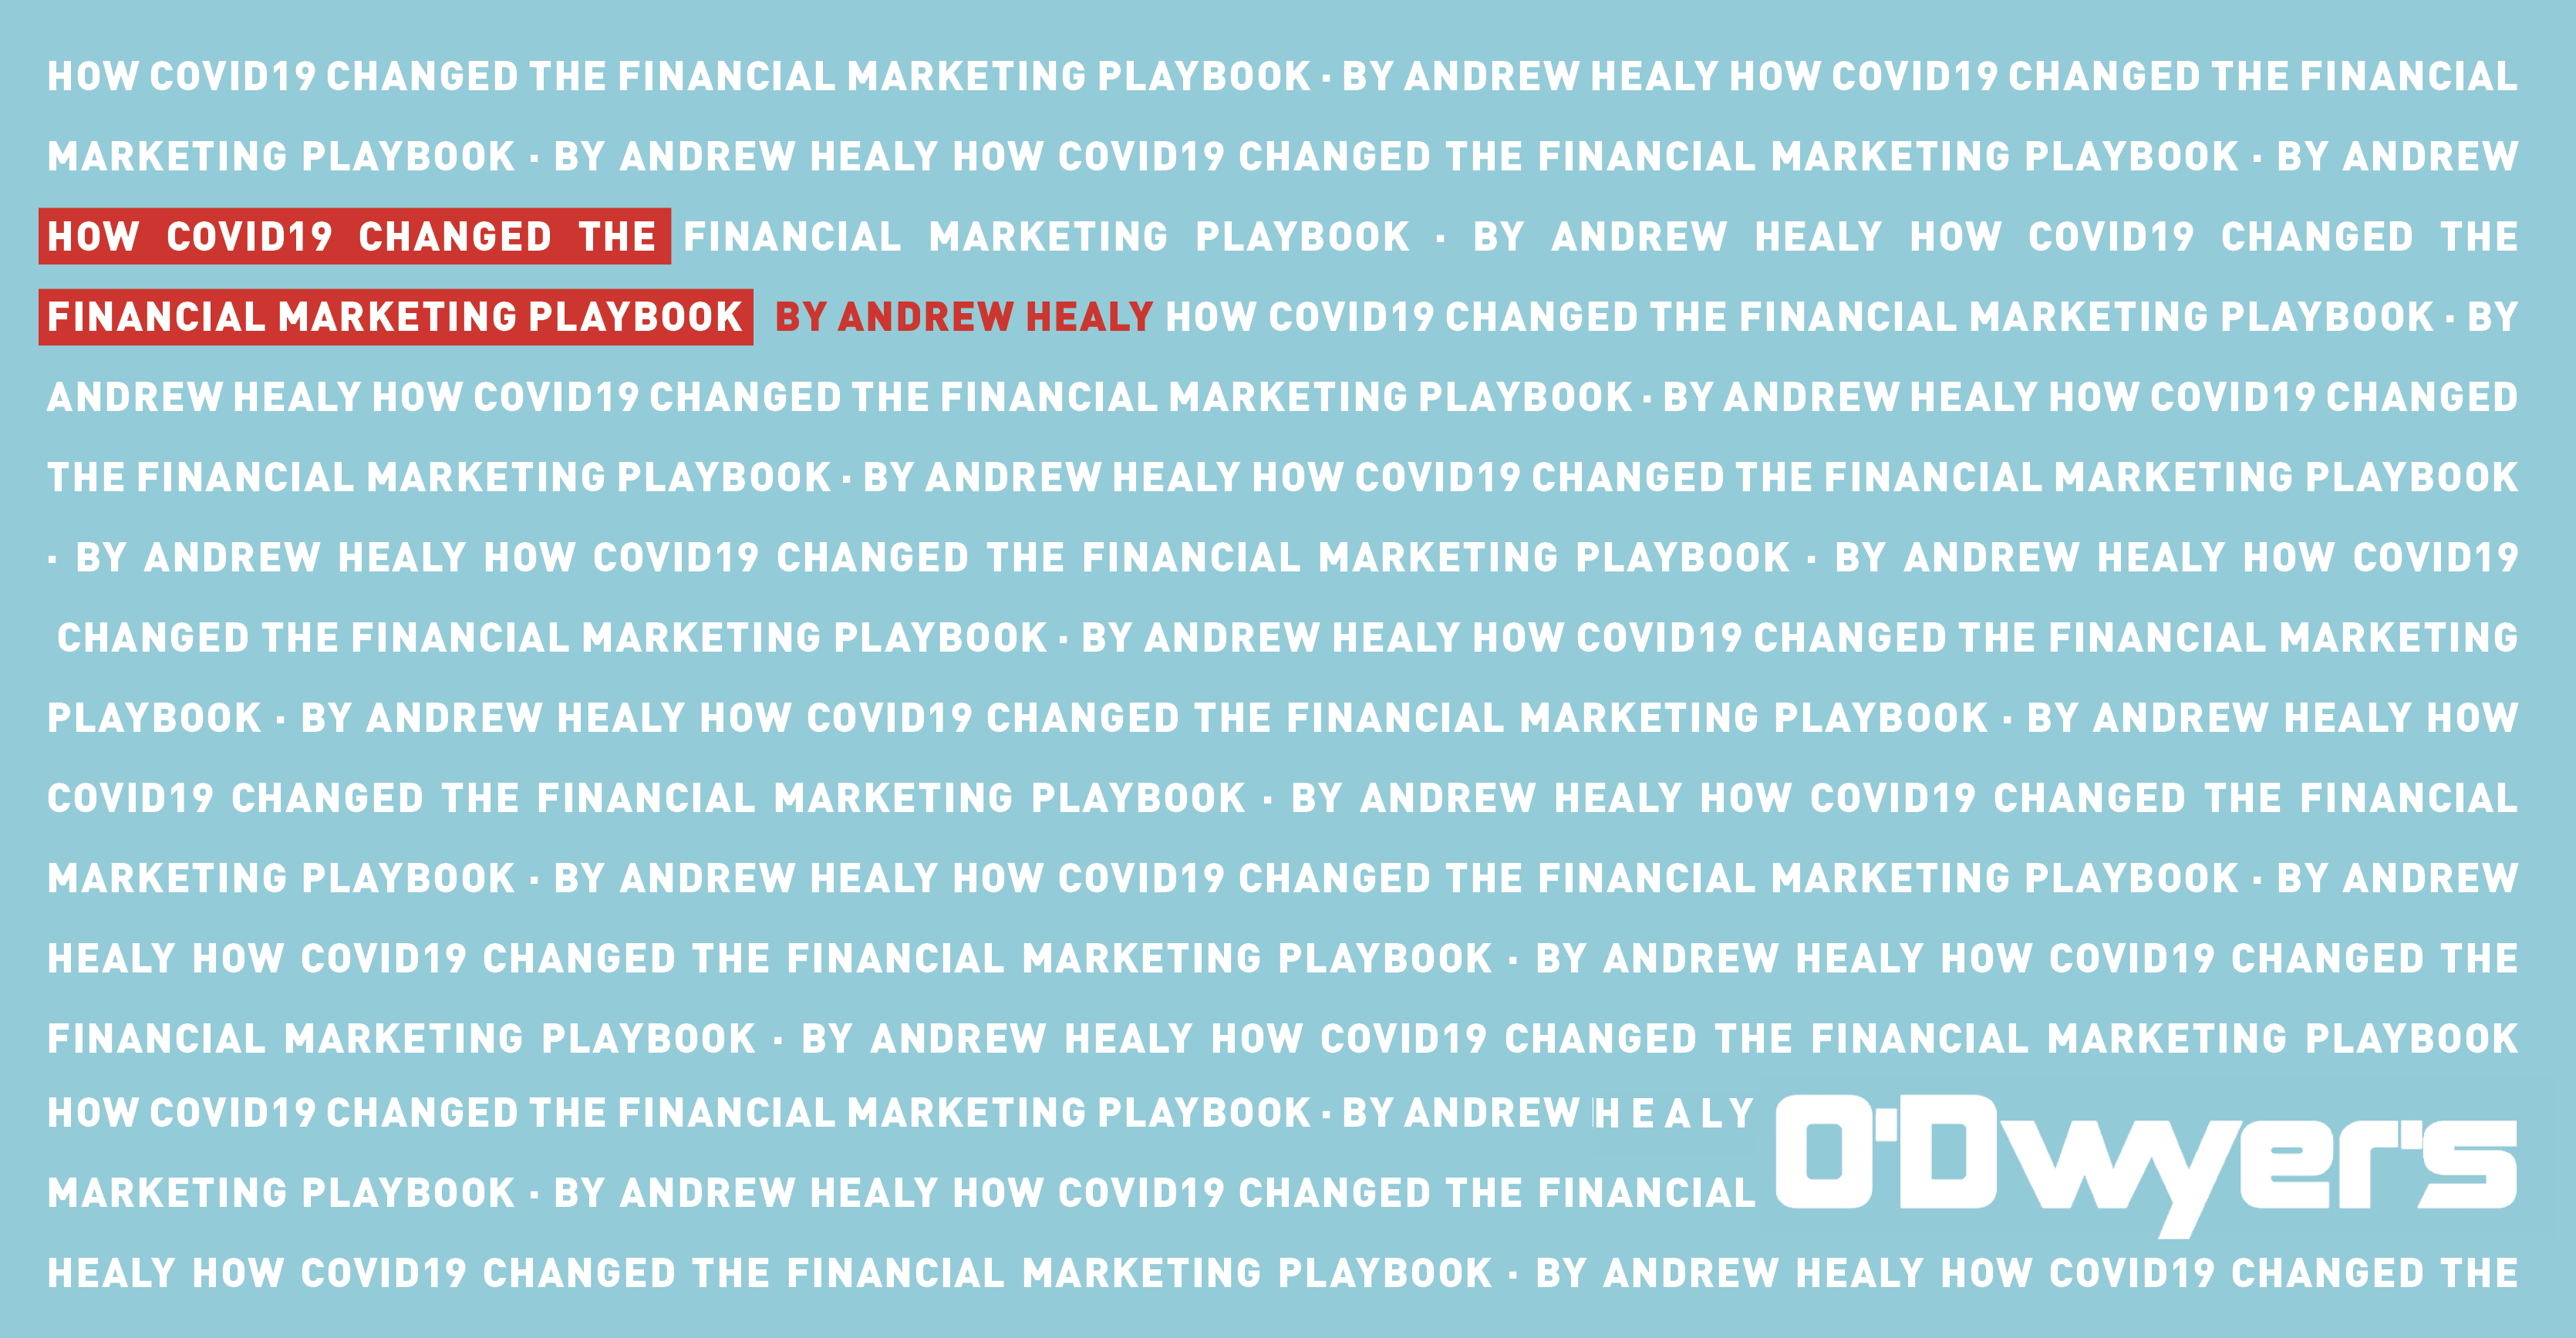 How COVID-19 Changed the Financial Marketing Playbook